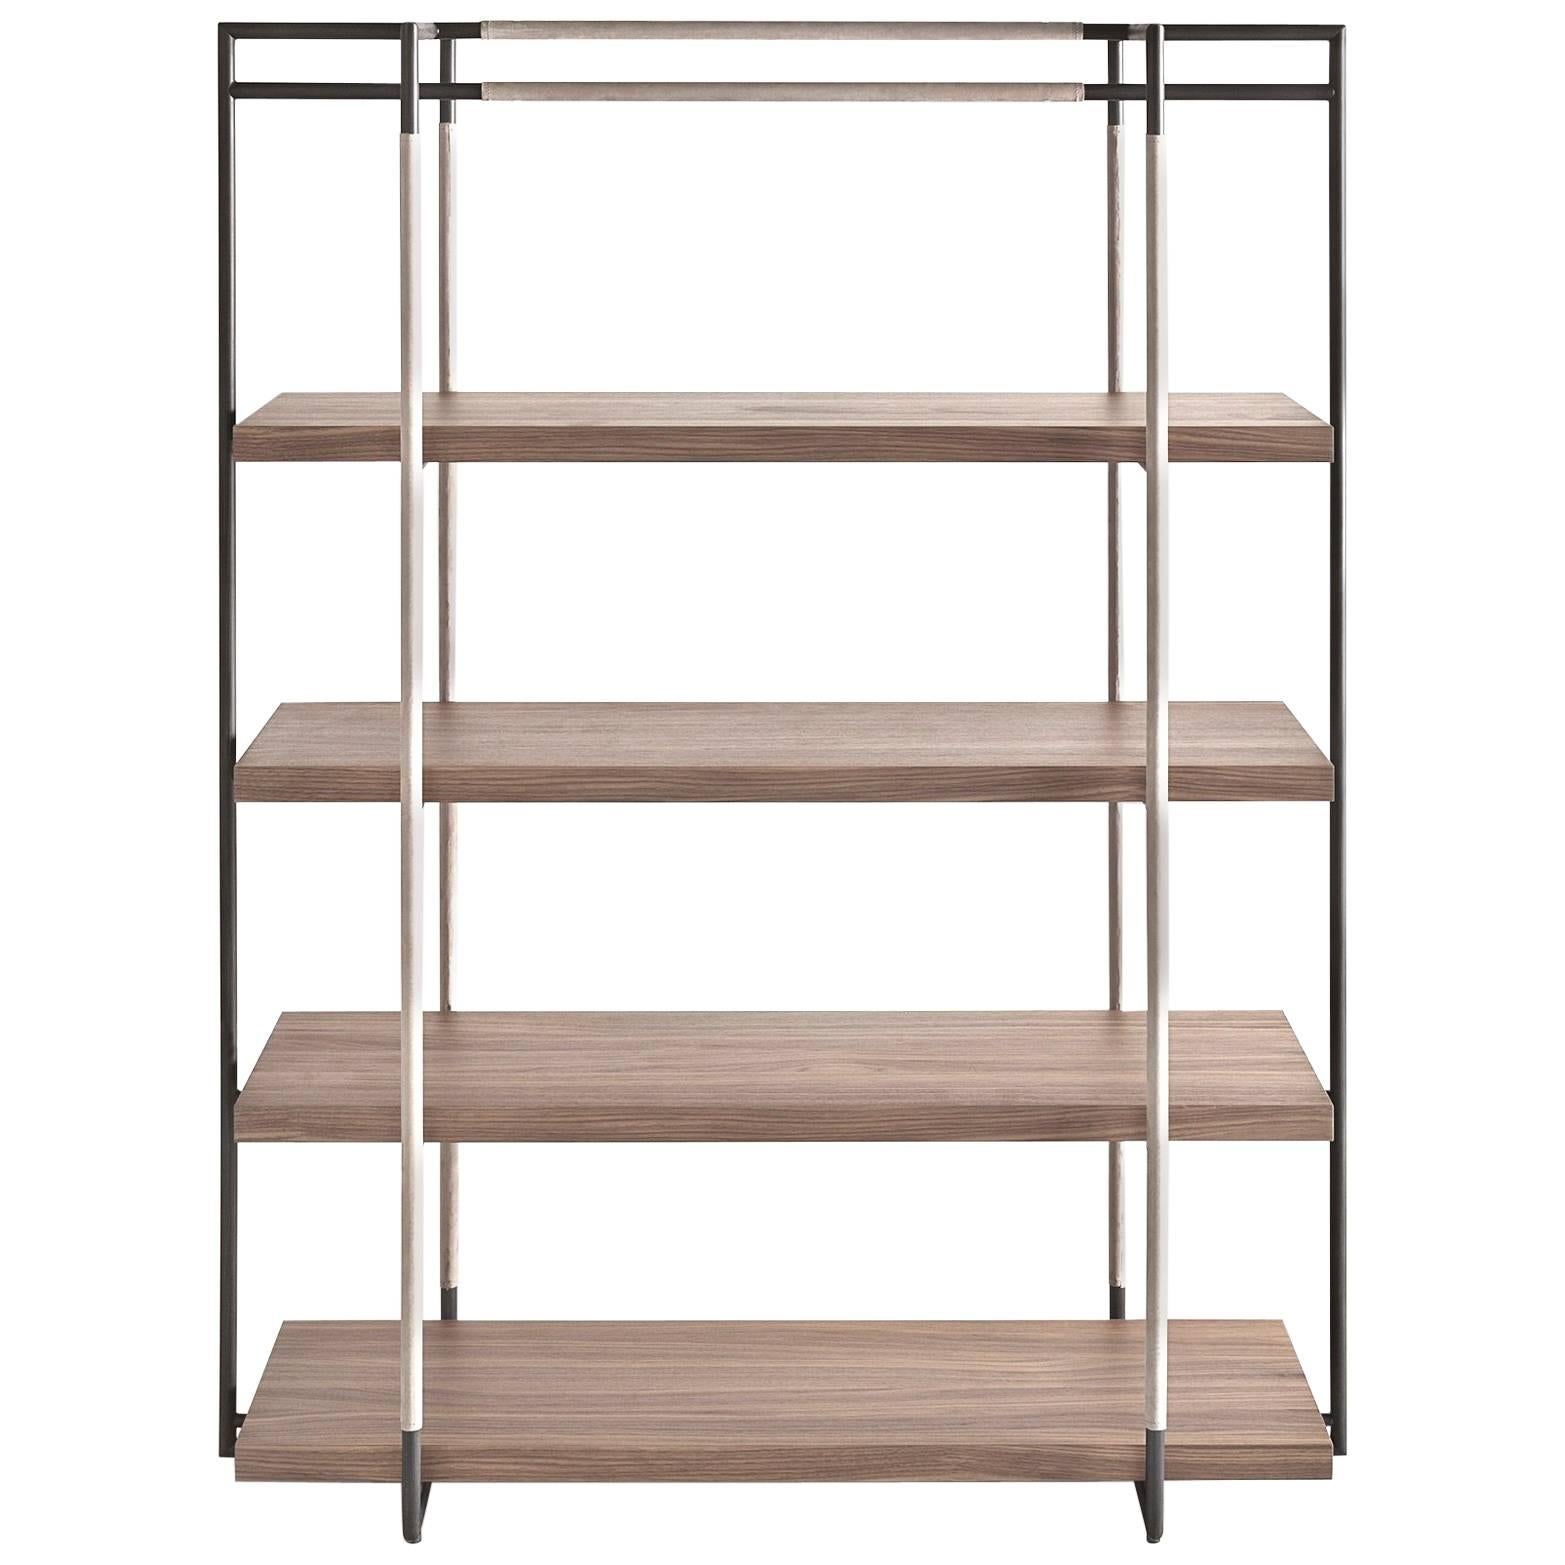 Bak Bookcase by Ferruccio Lavi in Walnut, Steel and Leather in Various Colors For Sale